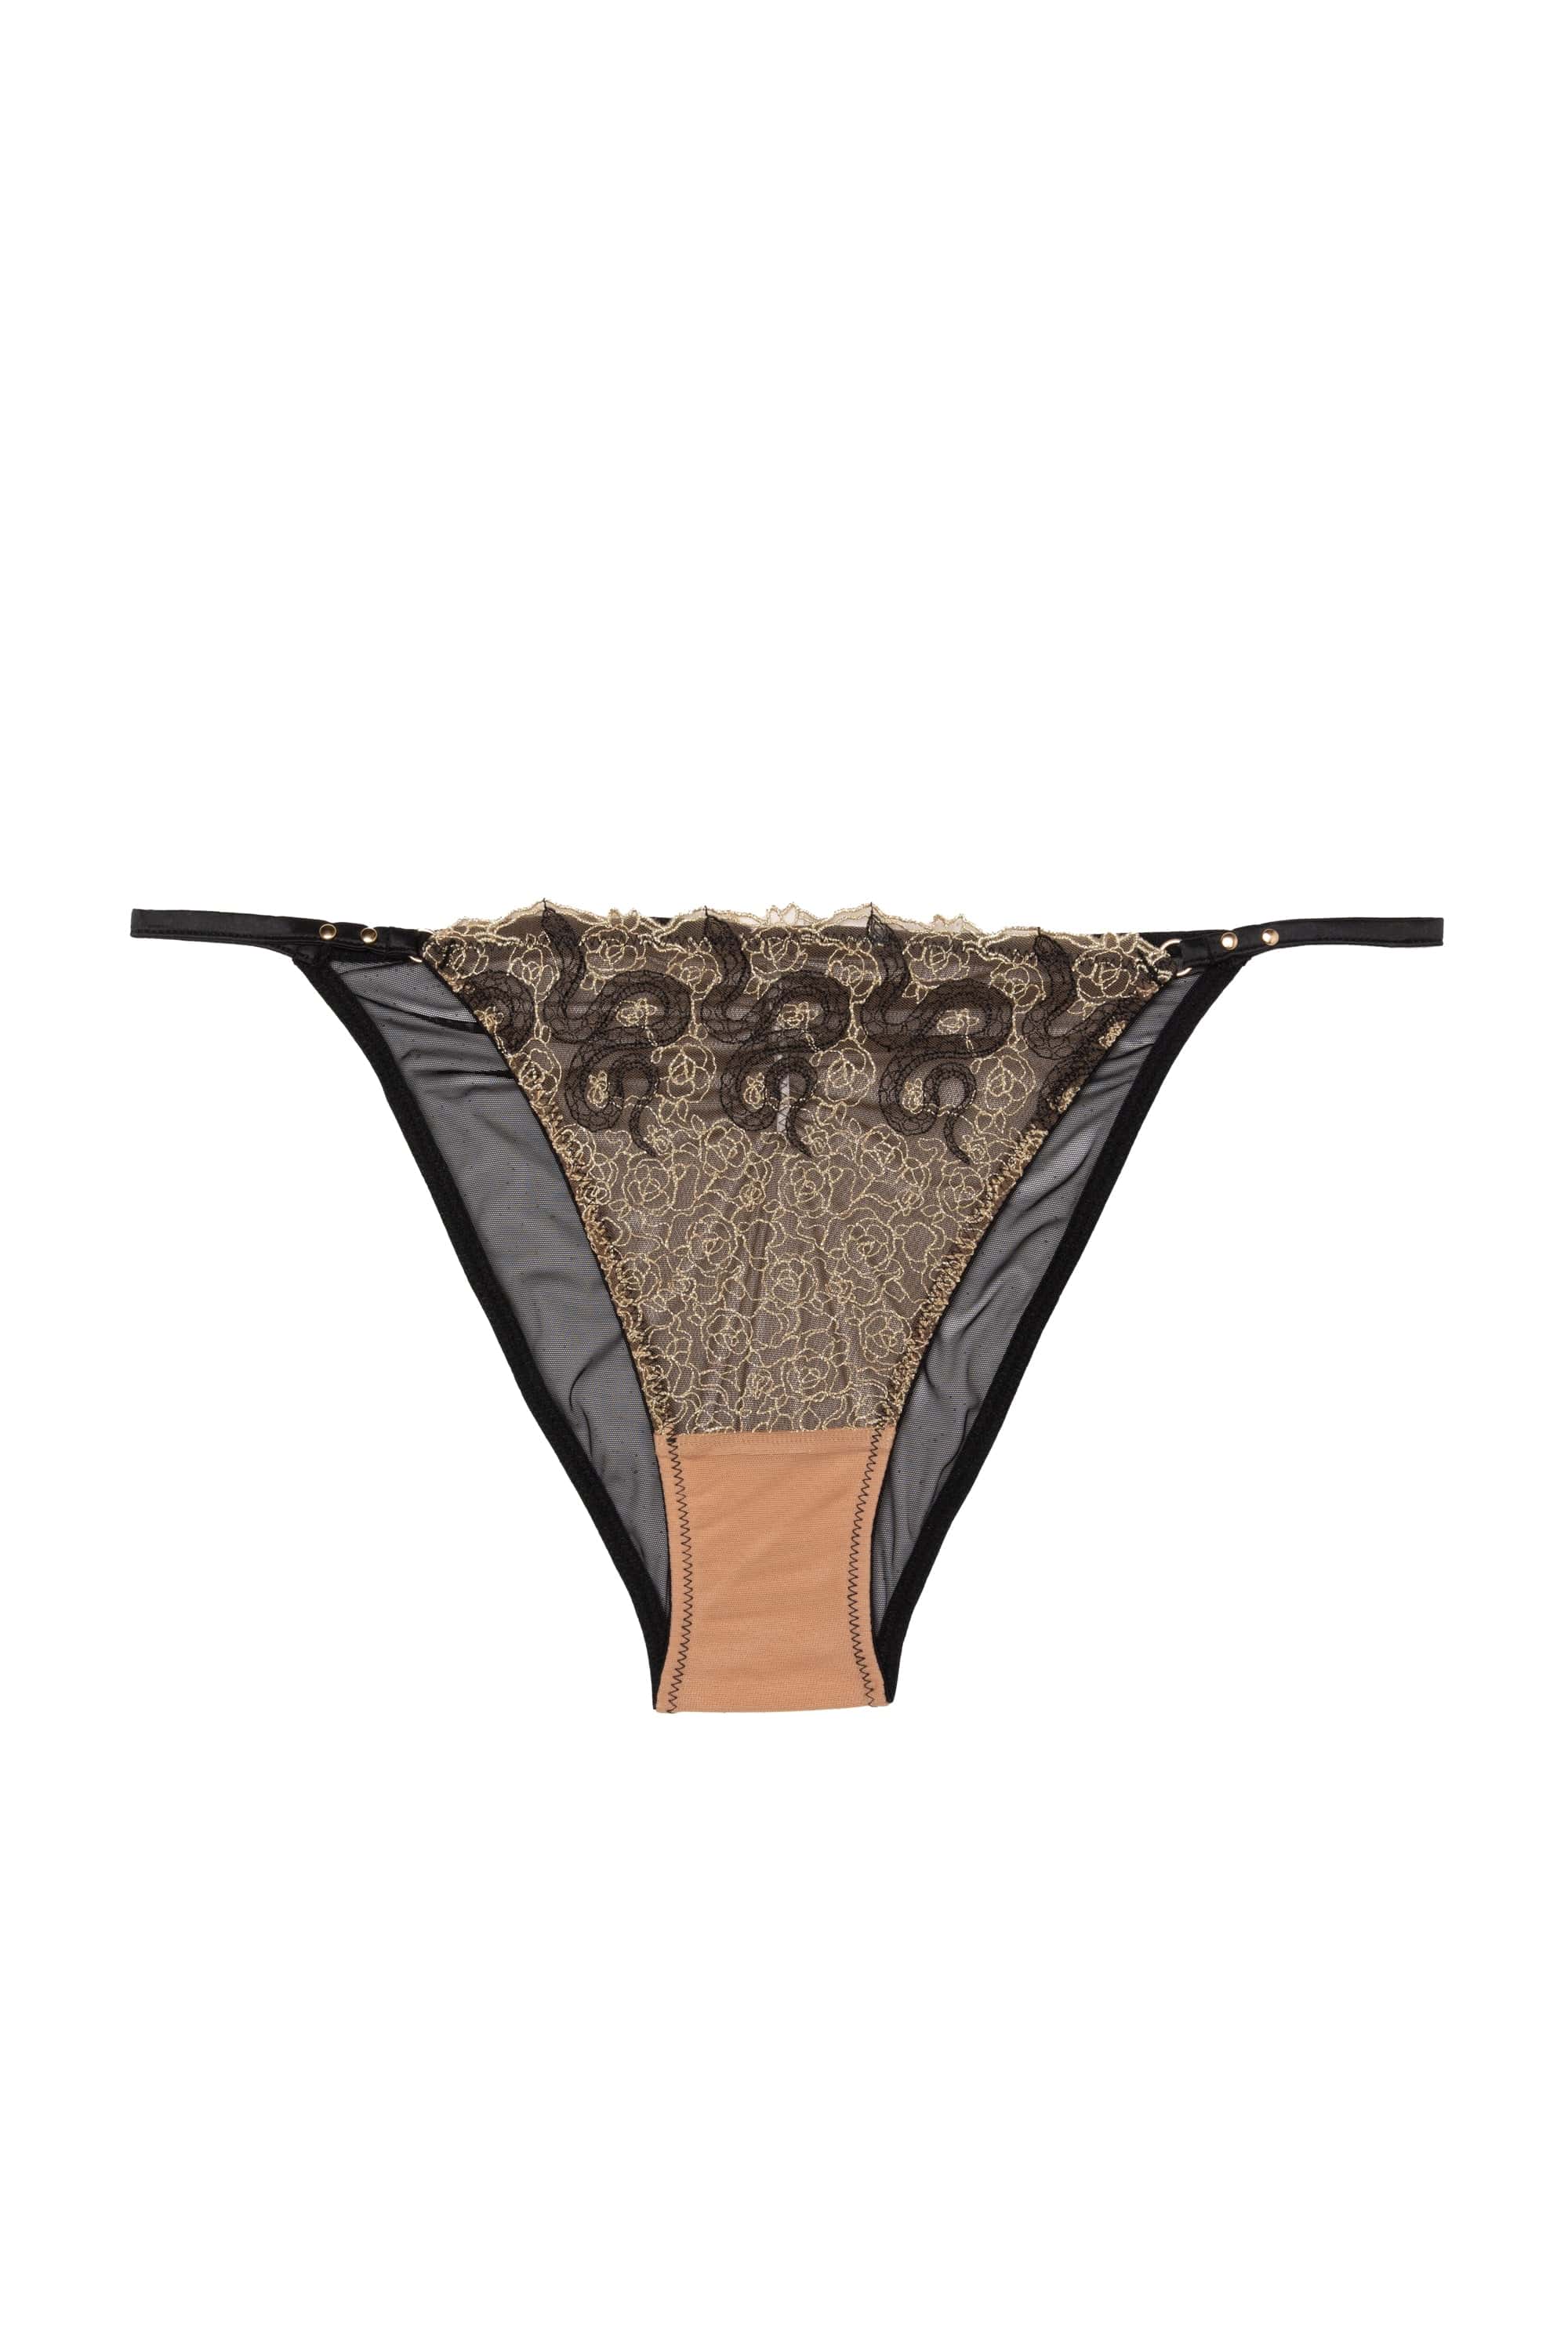 Amal Gold And Black Embroidery Tanga Brief